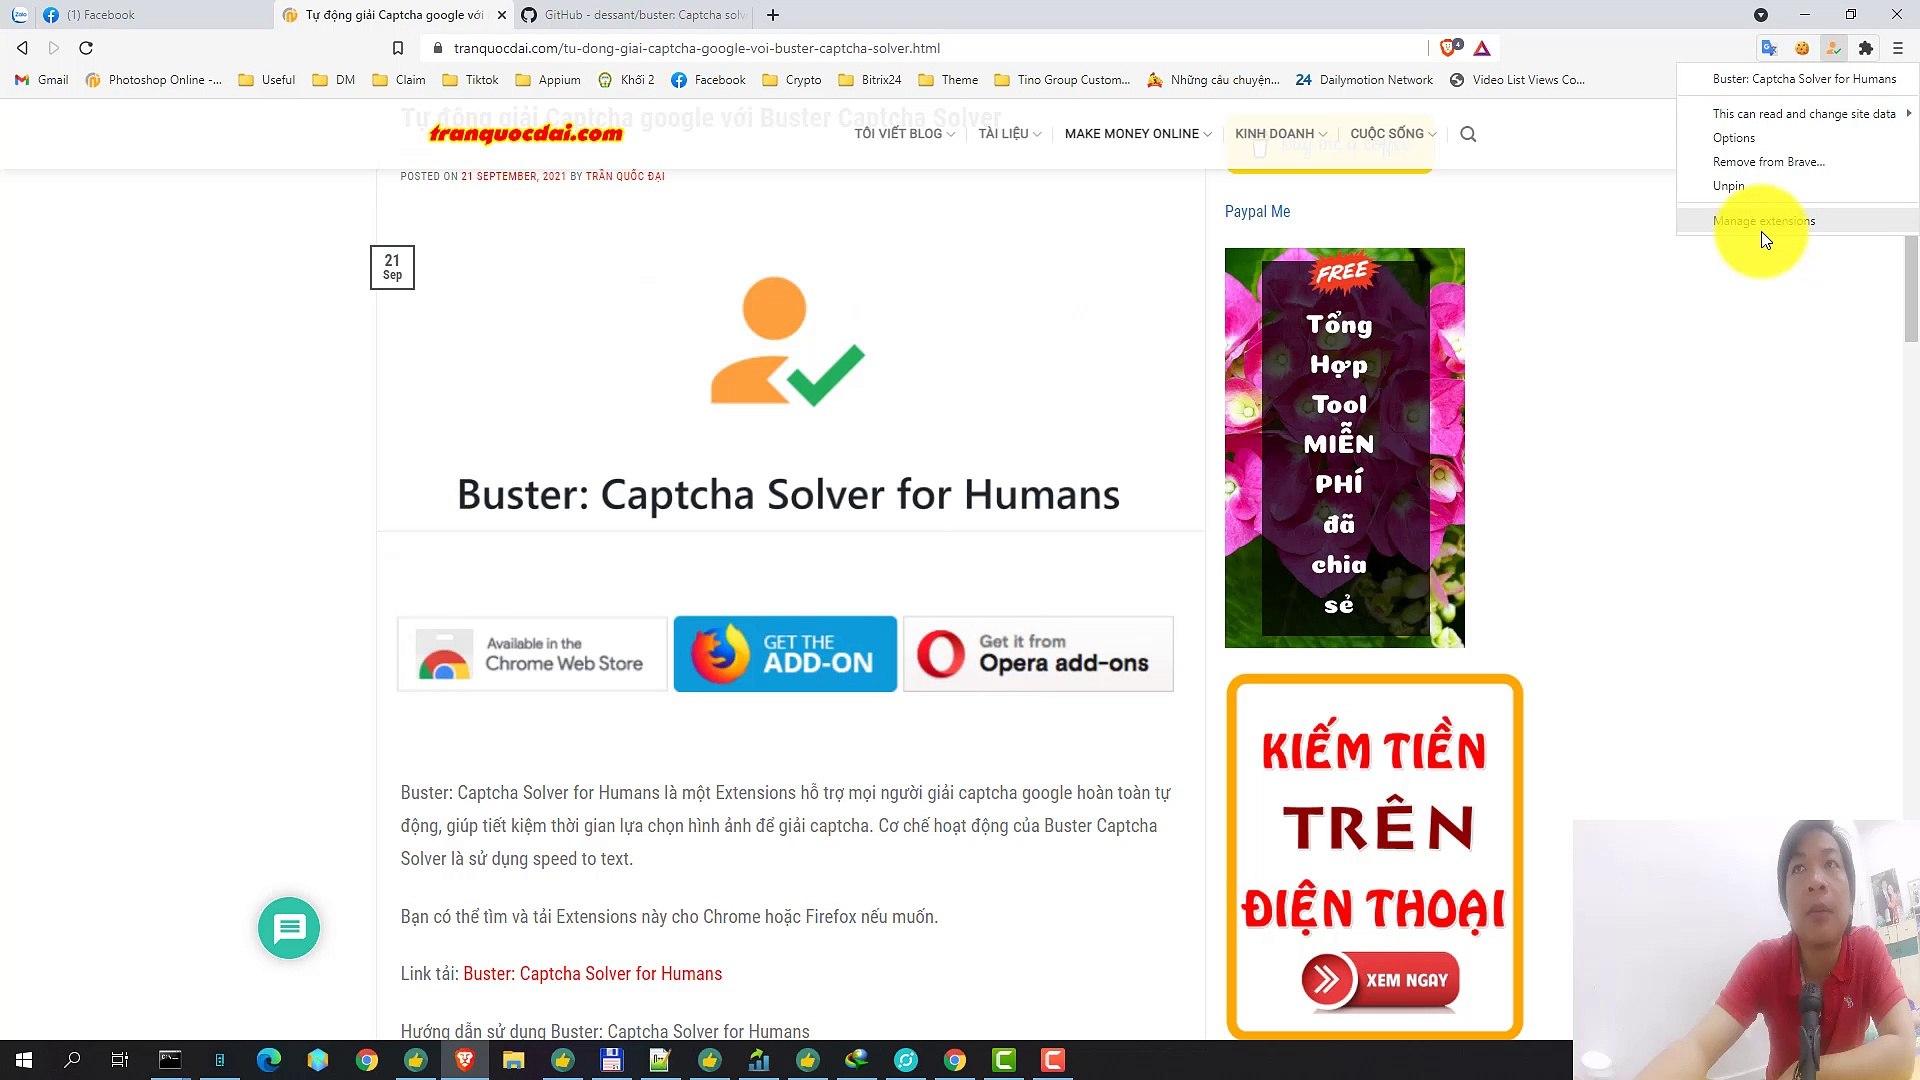 Buster: Captcha Solver for Humans - video Dailymotion